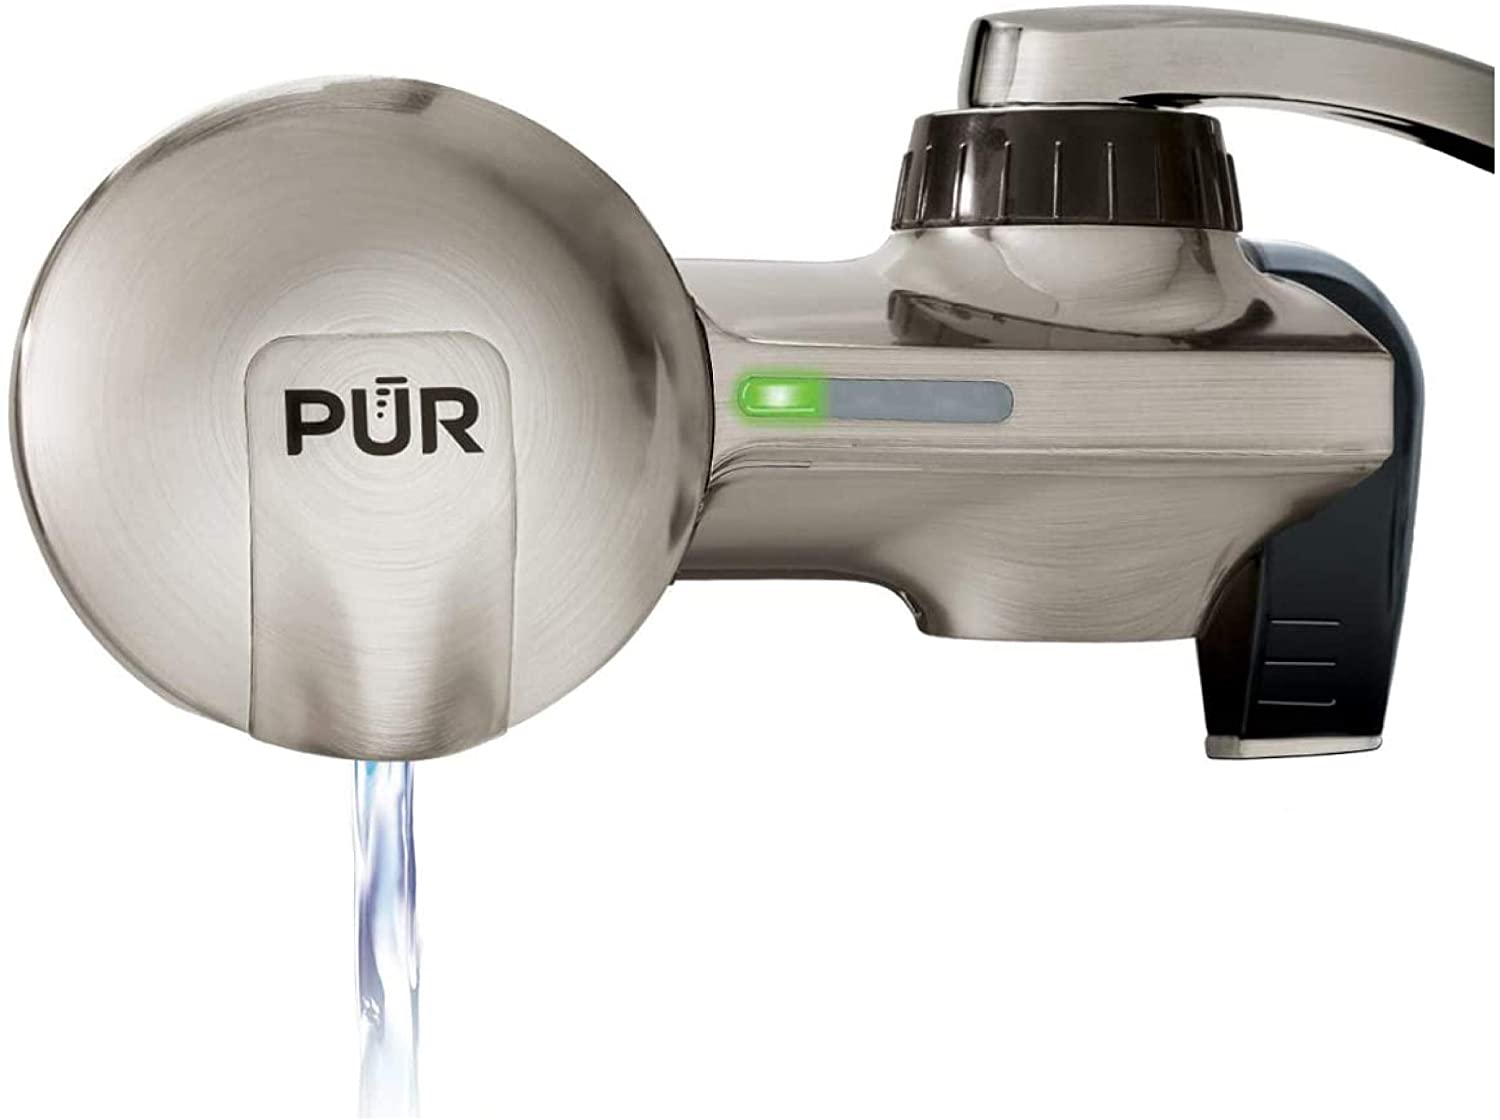 Pur pfm450s faucet water filtration system